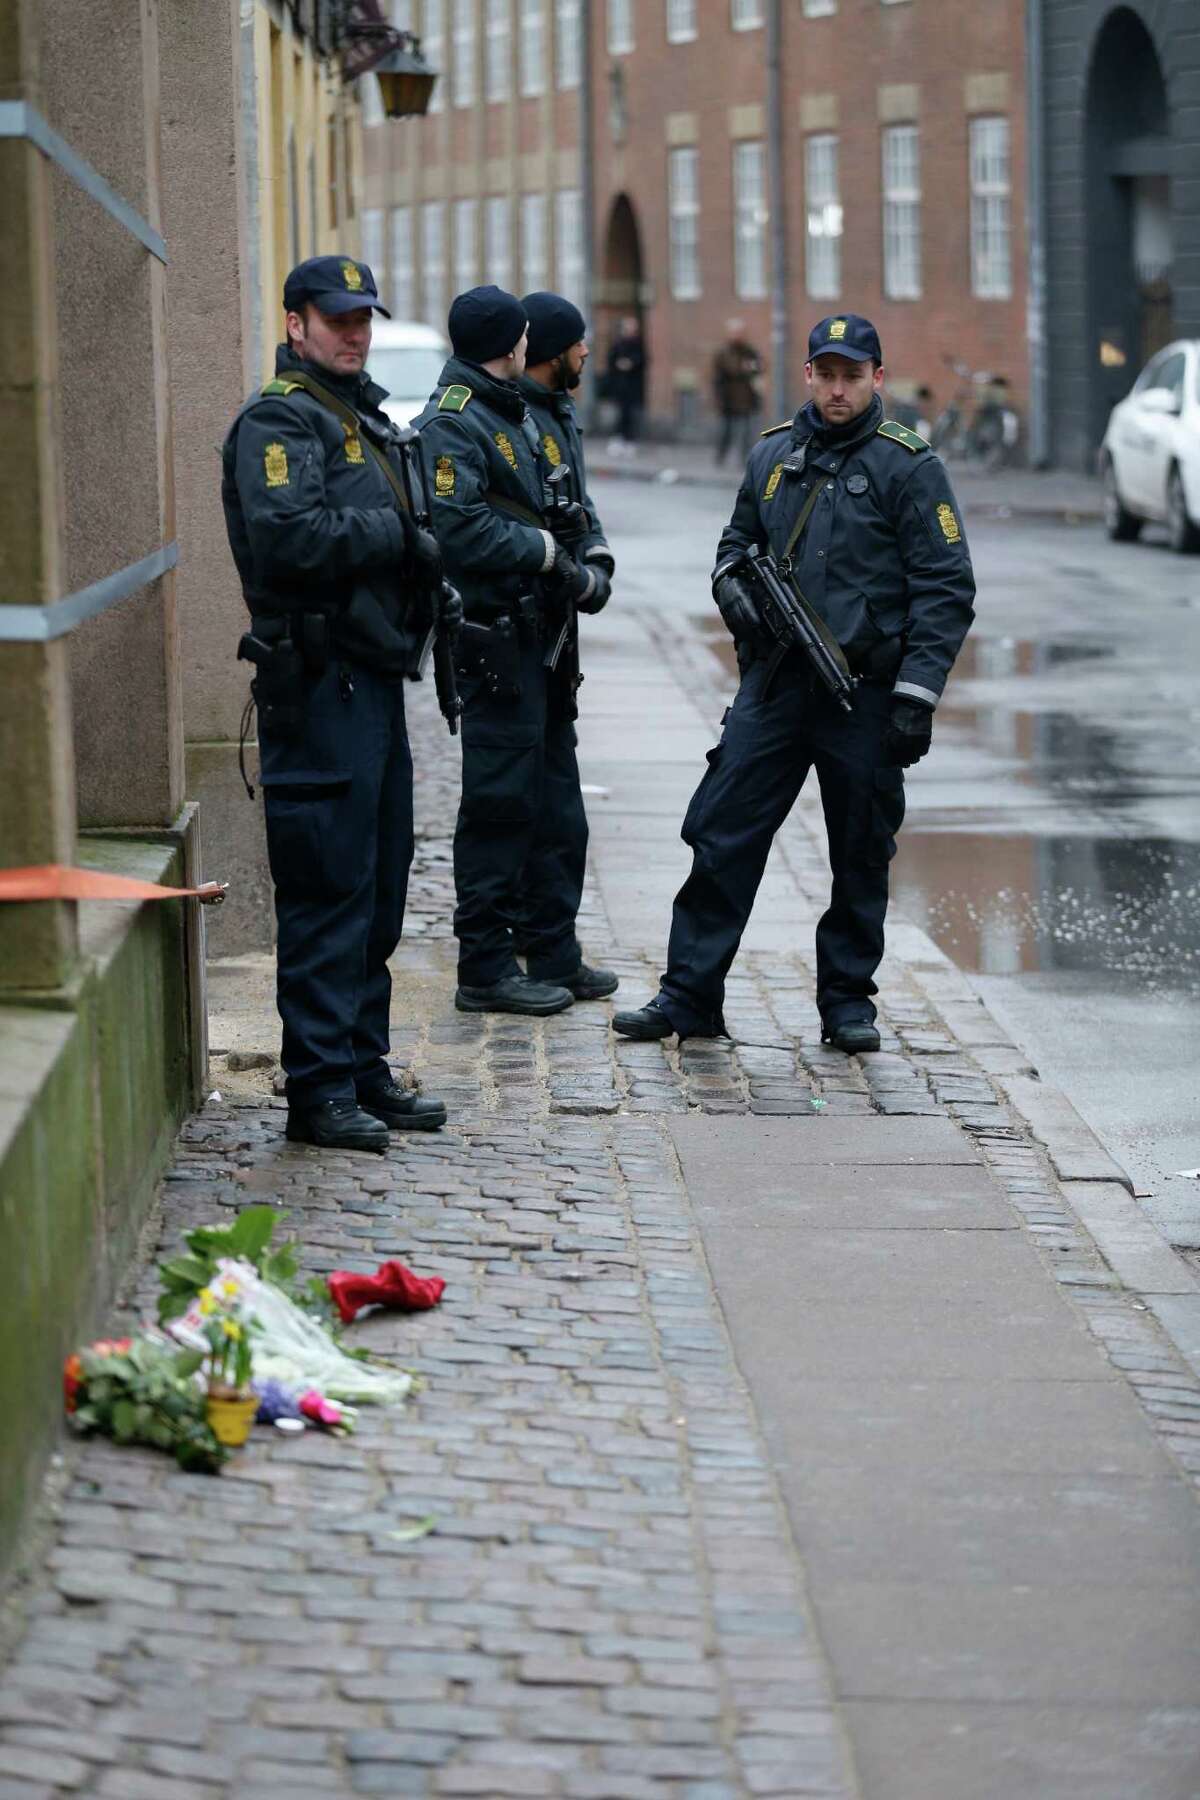 Danish police officers stand outside of a synagogue, Sunday, Feb. 15, 2015, where a gunman opened fire in Copenhagen, Denmark. Danish police shot and killed a man early Sunday suspected of carrying out shooting attacks at a free speech event and then at a Copenhagen synagogue, killing two men, including a member of Denmark's Jewish community. Five police officers were also wounded in the attacks. (AP Photo/Niels Hougaard, POLFOTO) DENMARK OUT ORG XMIT: COP807